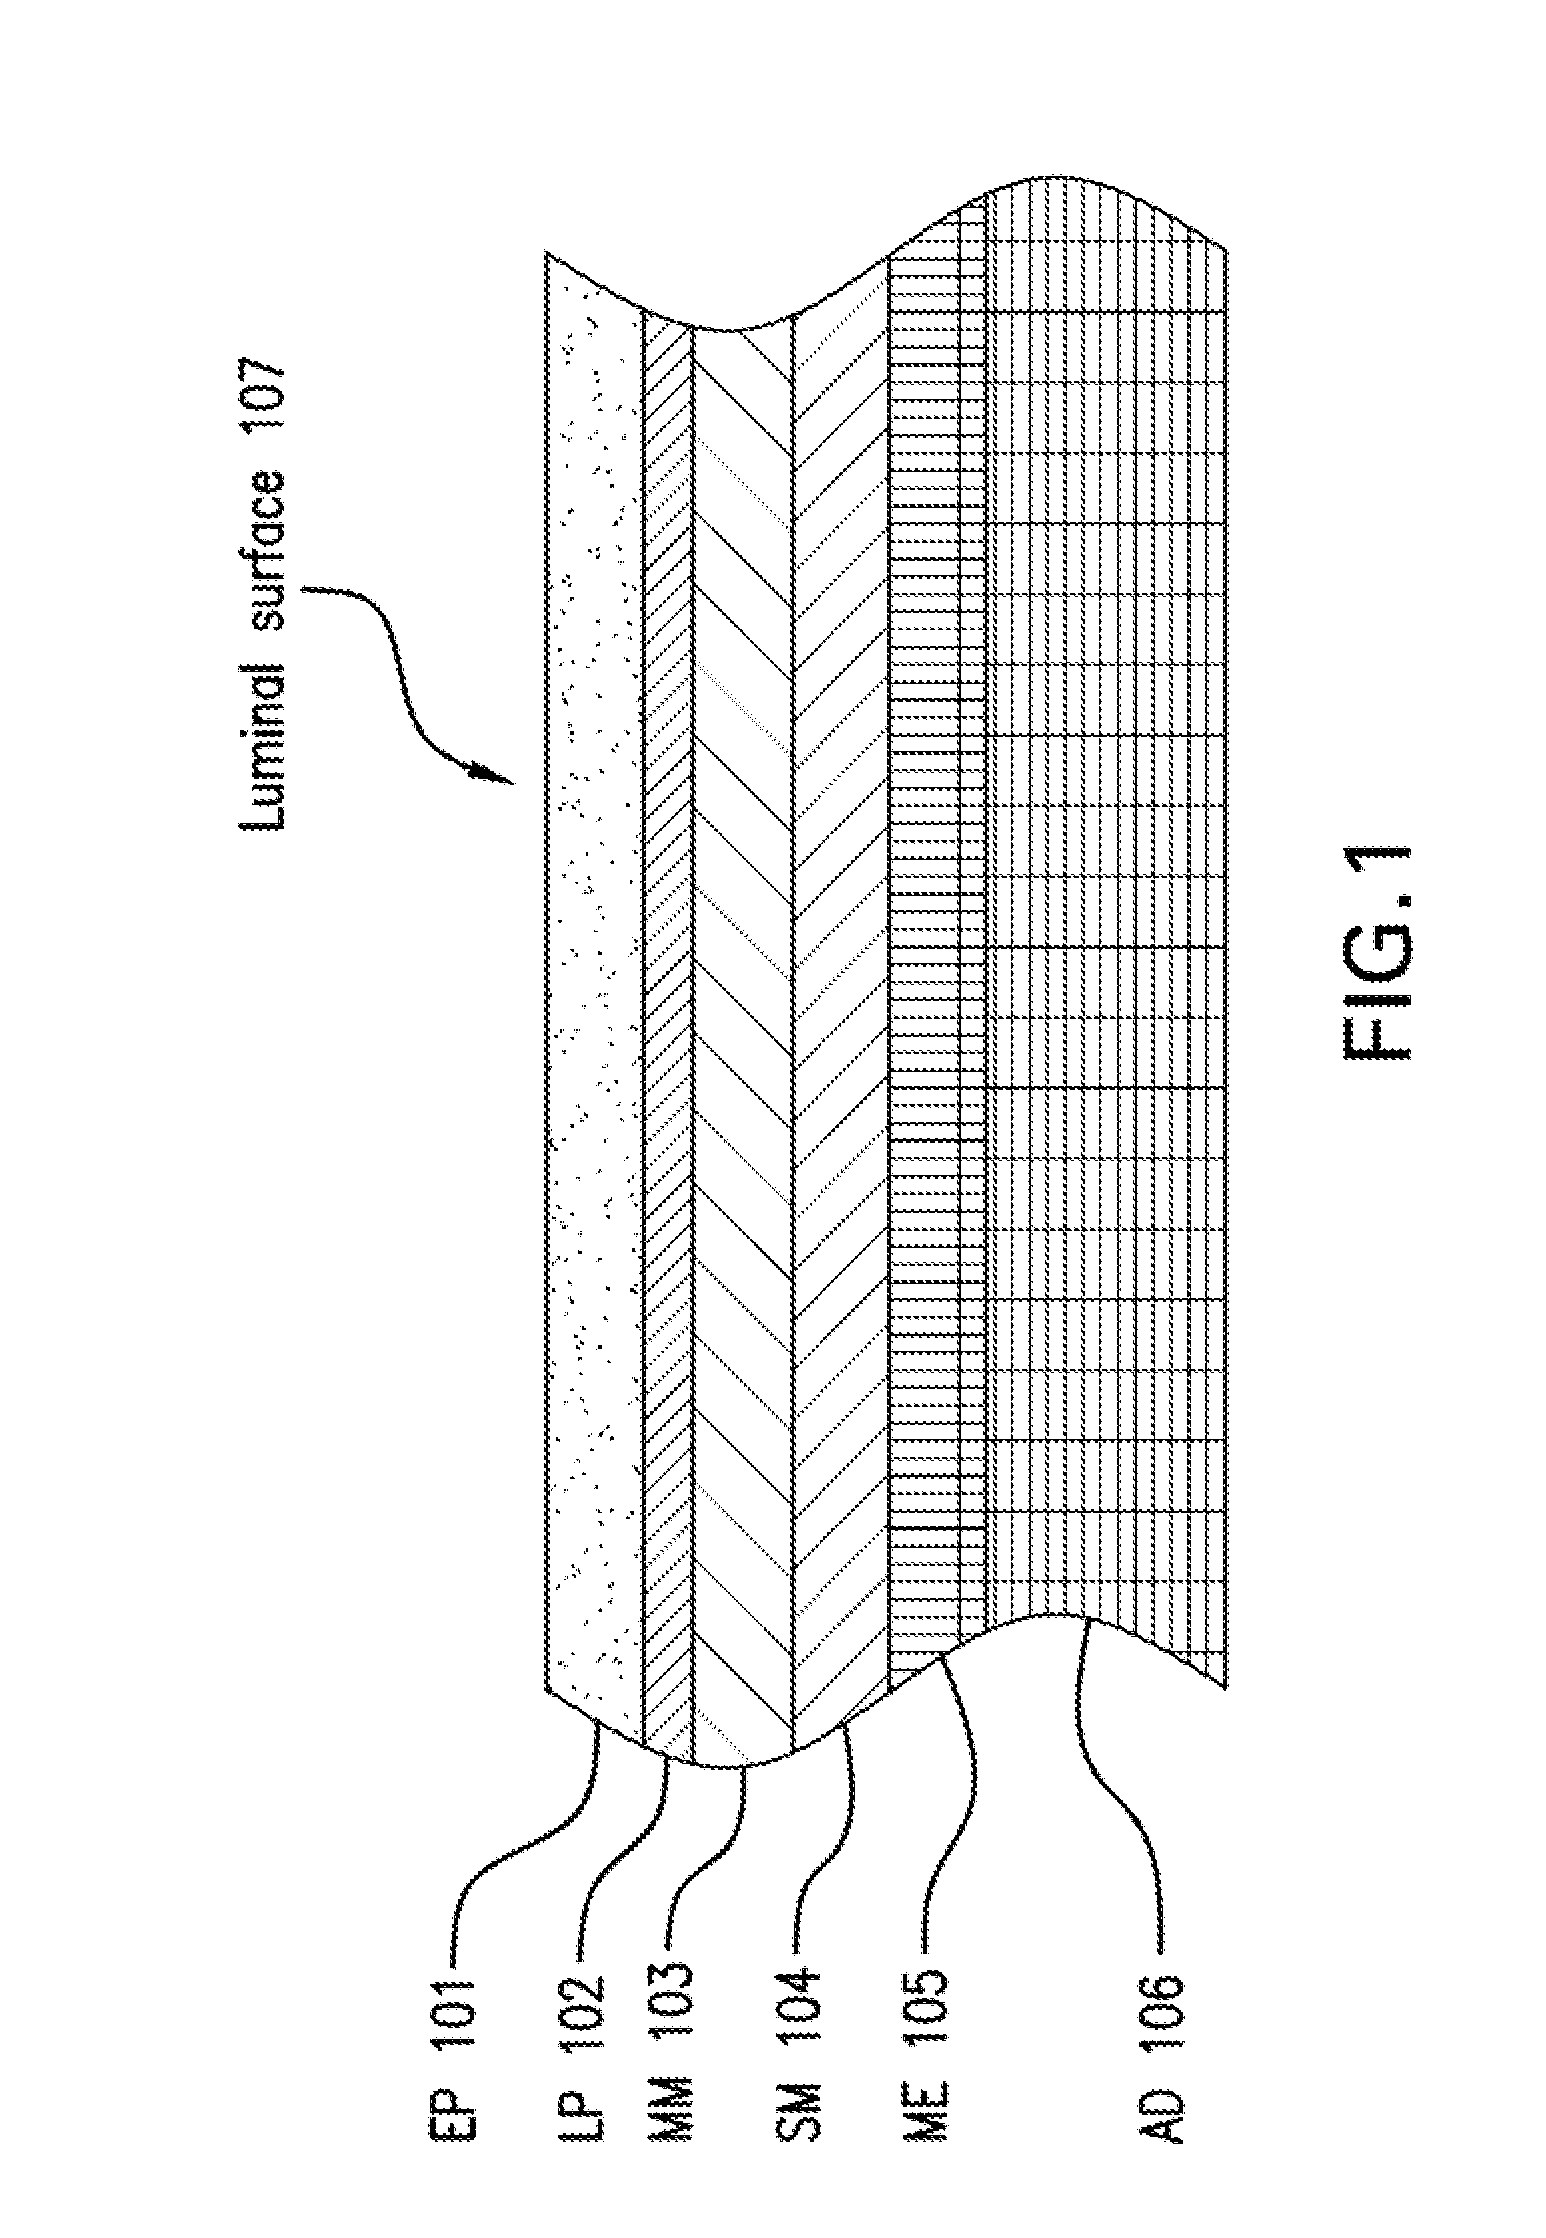 Systems, devices, apparatus and method devices for providing endoscopic mucosal therapy